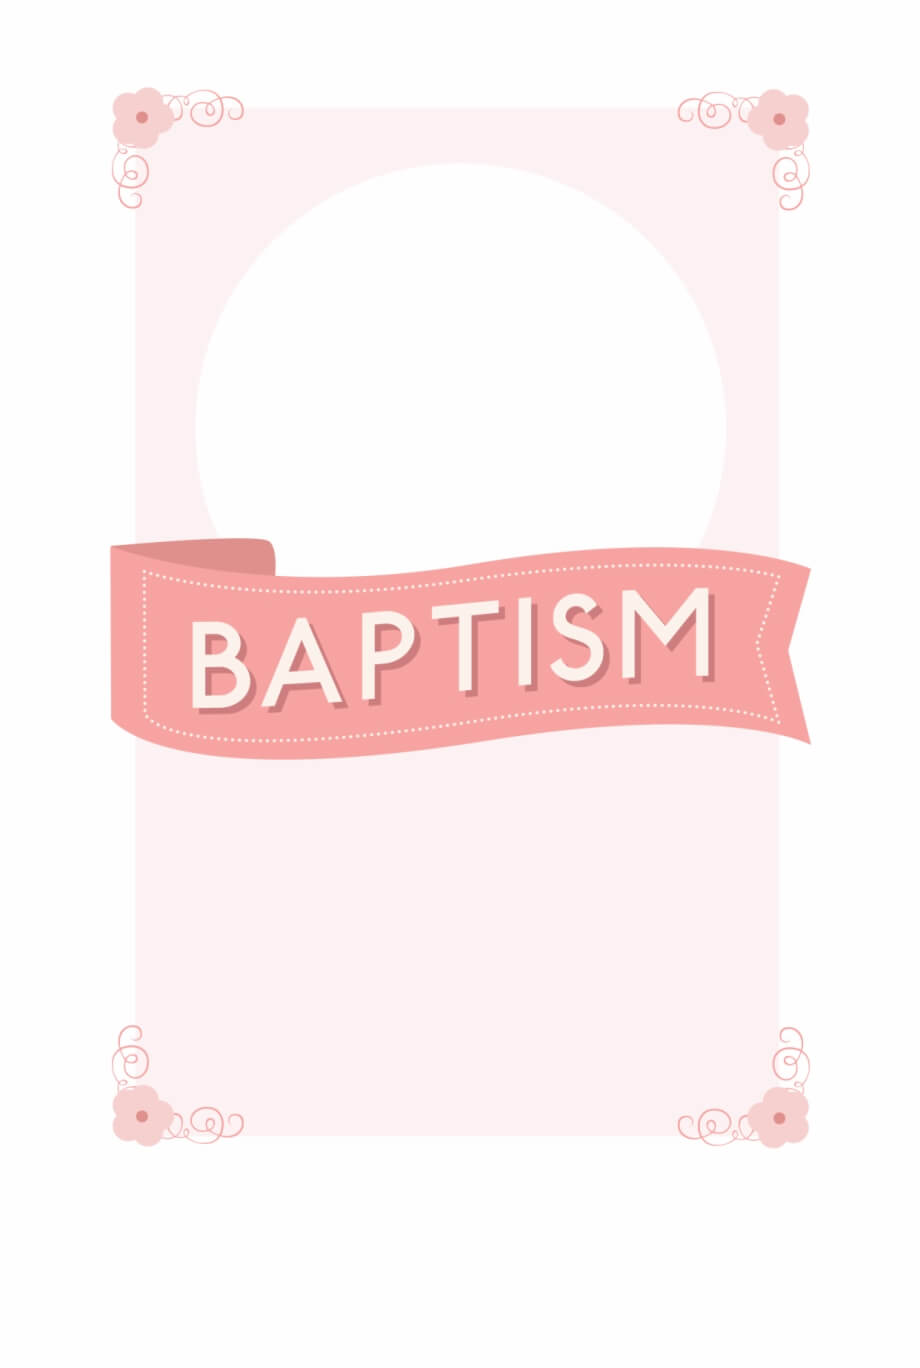 032 Template Ideas 1508436 Free Printable Baptism For Blank Christening Invitation Templates